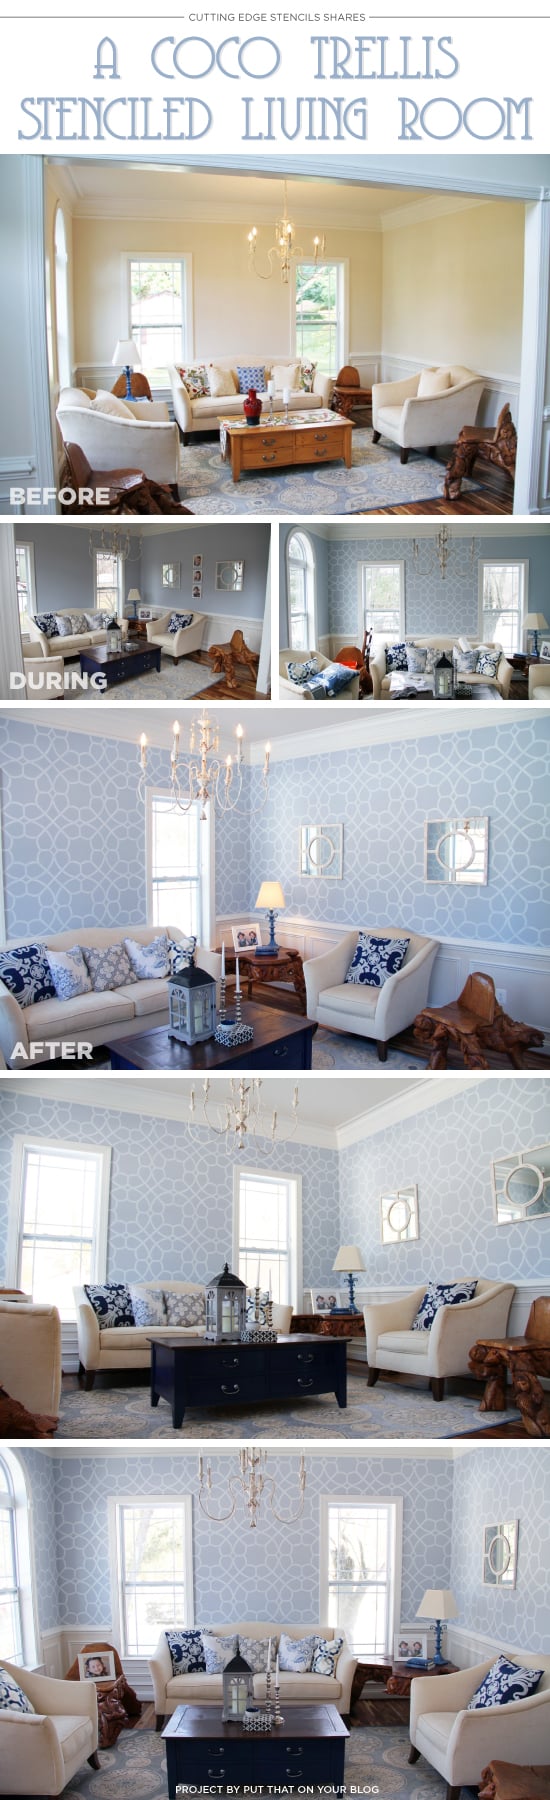 Cutting Edge Stencils shares a DIY stenciled living room with a wallpaper look using the Coco Trellis Allover stencil. http://www.cuttingedgestencils.com/coco-trellis-allover-pattern-stencil.html